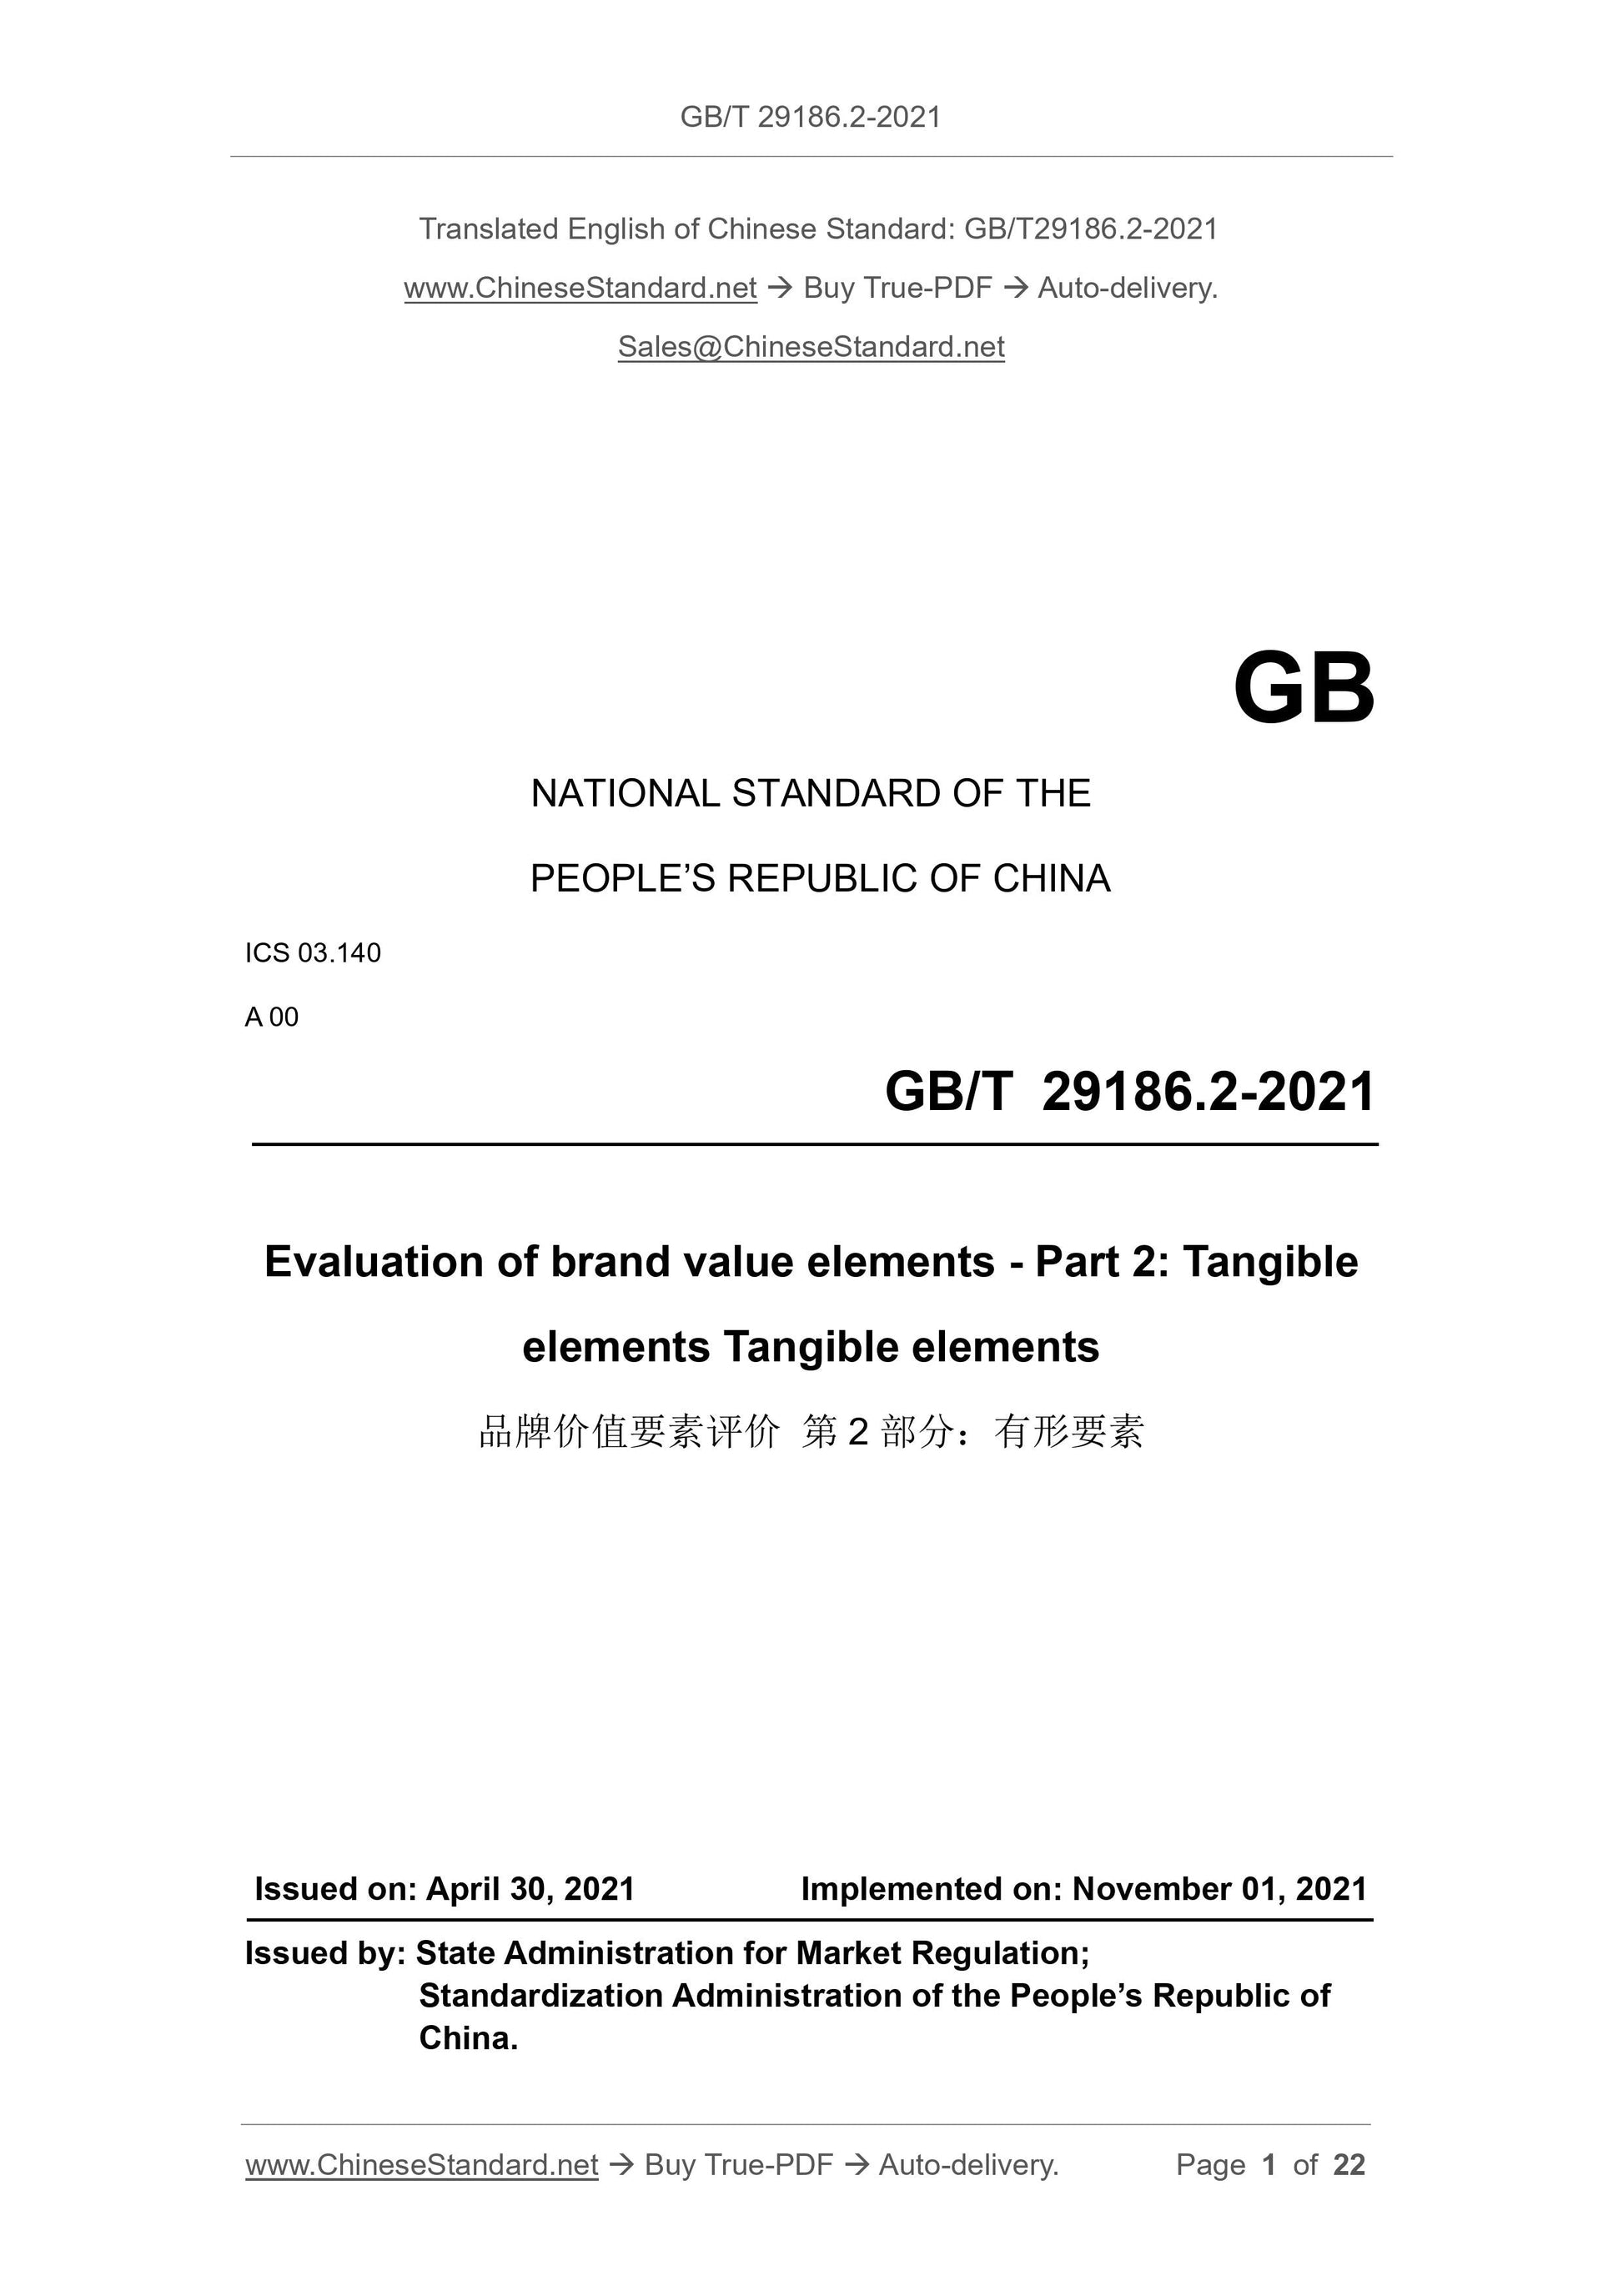 GB/T 29186.2-2021 Page 1